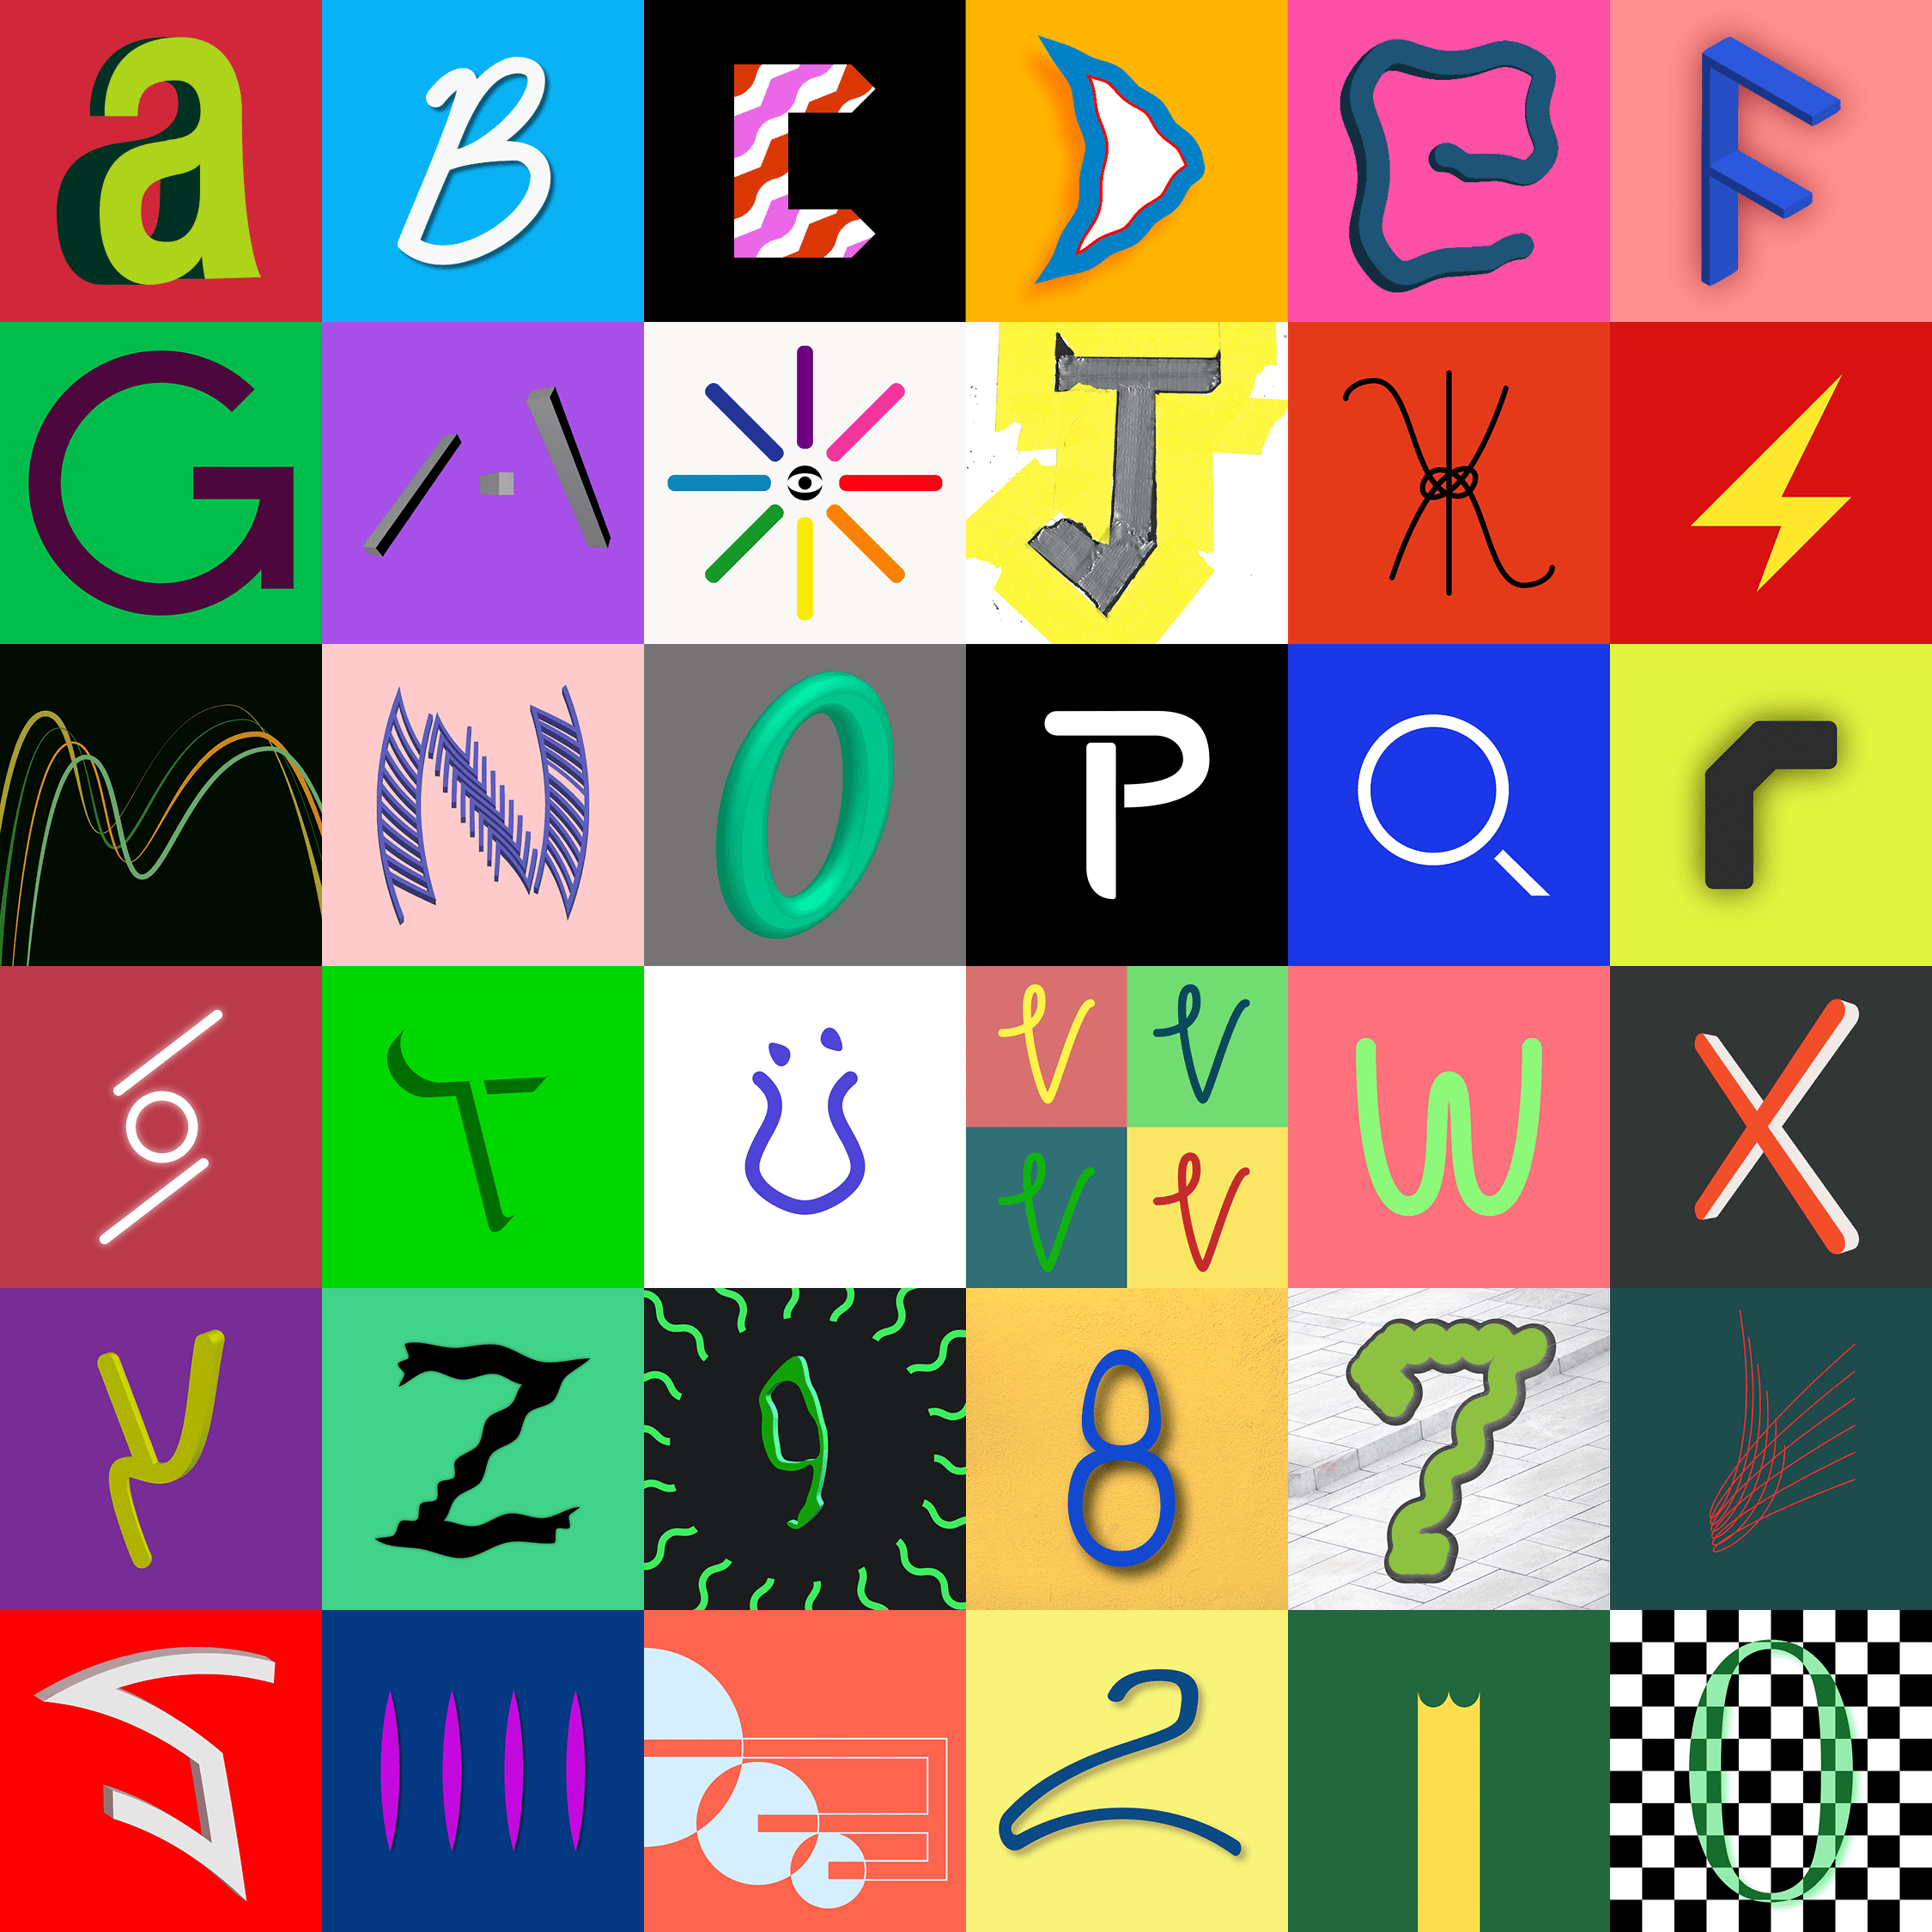 A six by six grid of all 36 letterforms designed during the project